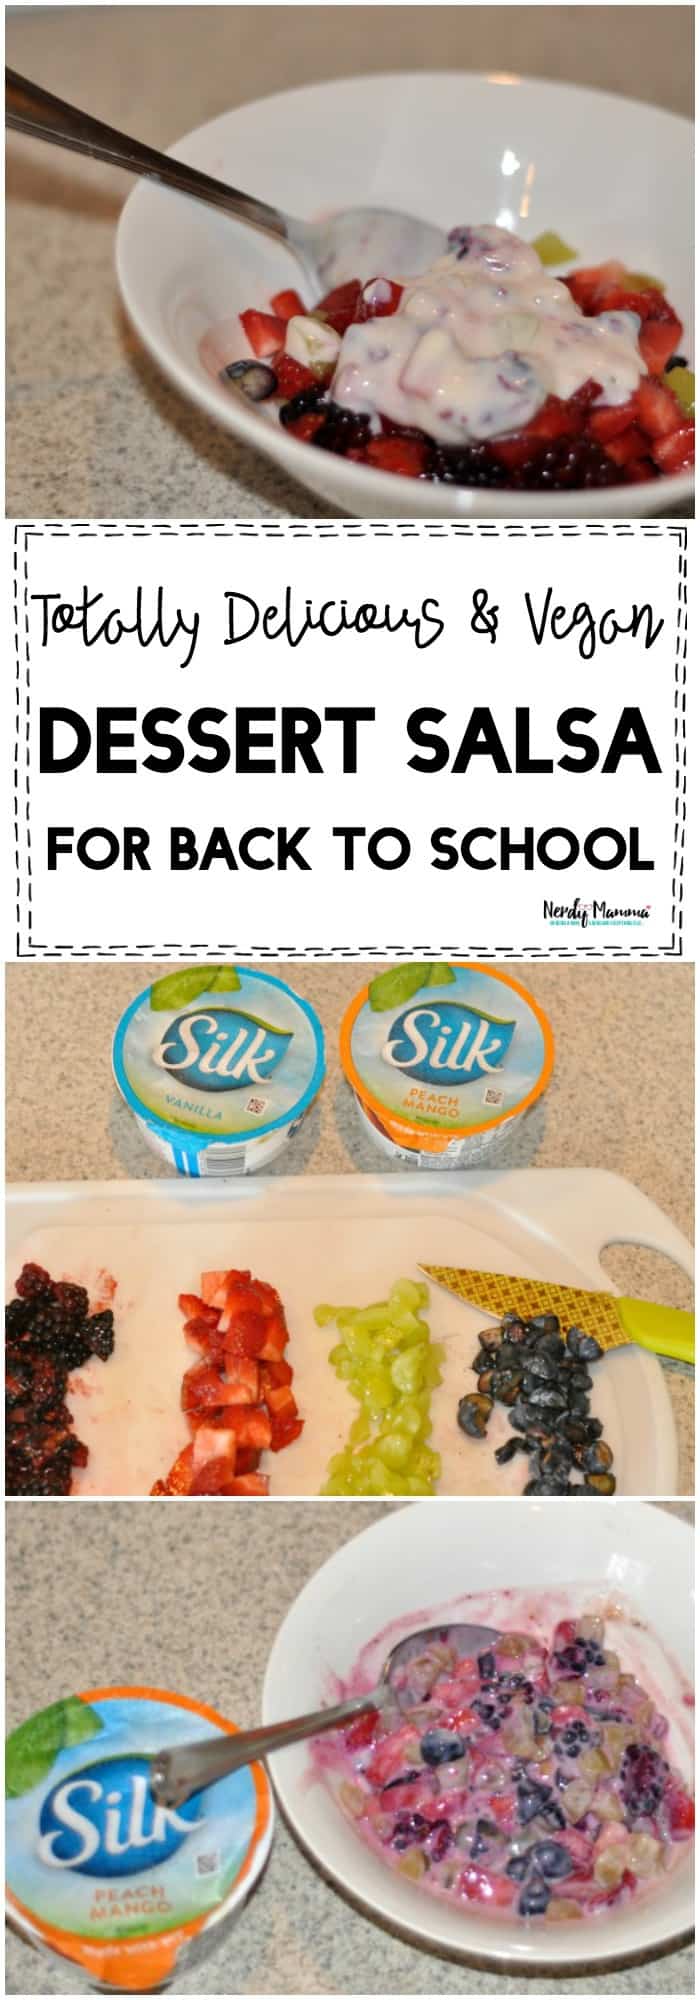 OMG you've GOT to try this DELICIOUS & VEGAN Dessert Salsa! It's the perfect after school snack!